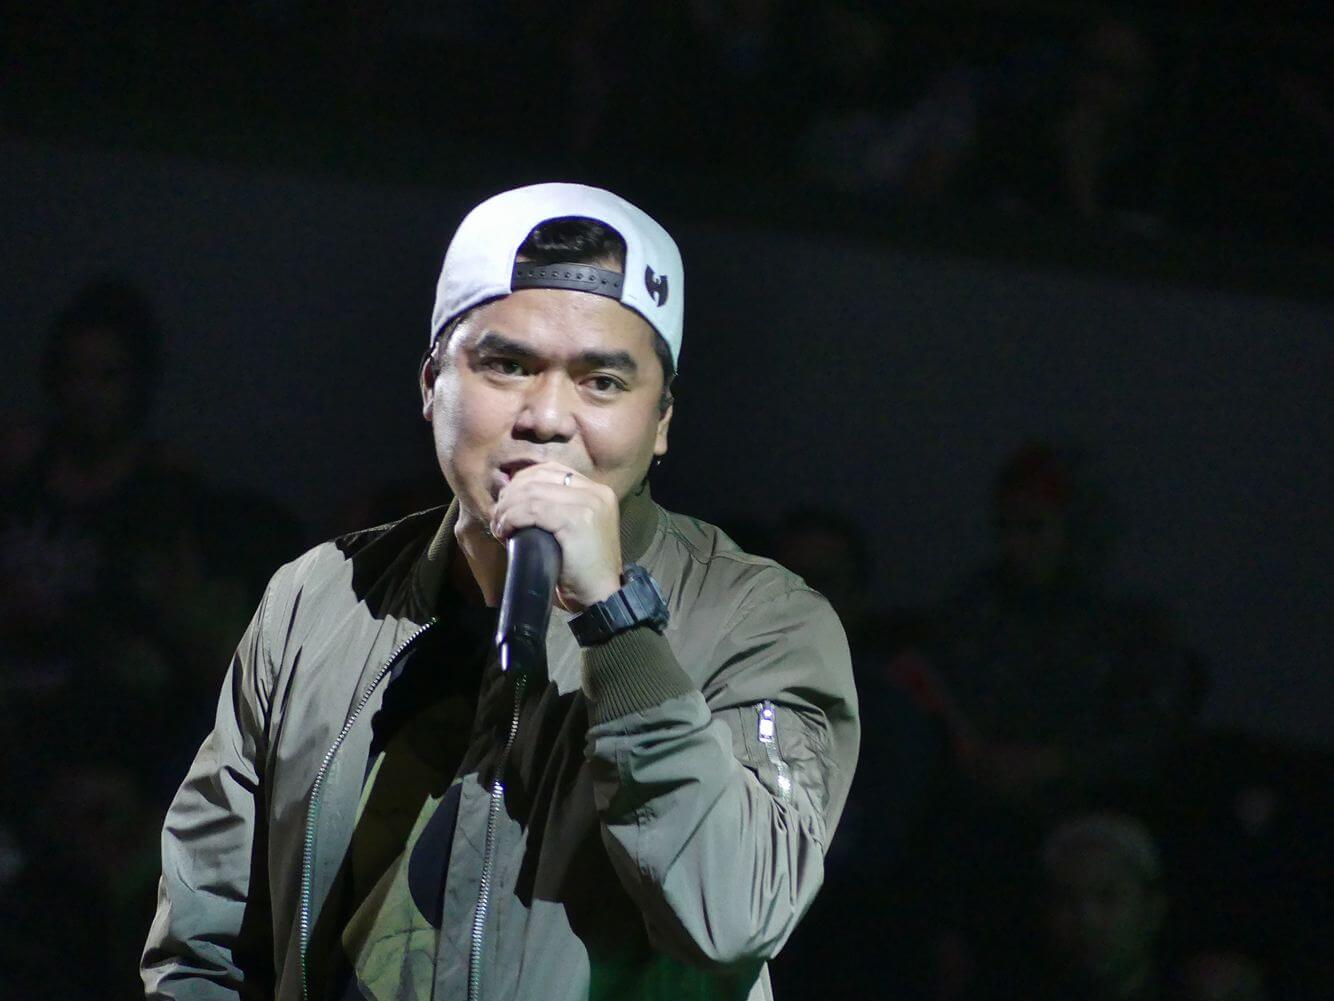 gloc-9-interview-for-mnl-online-news